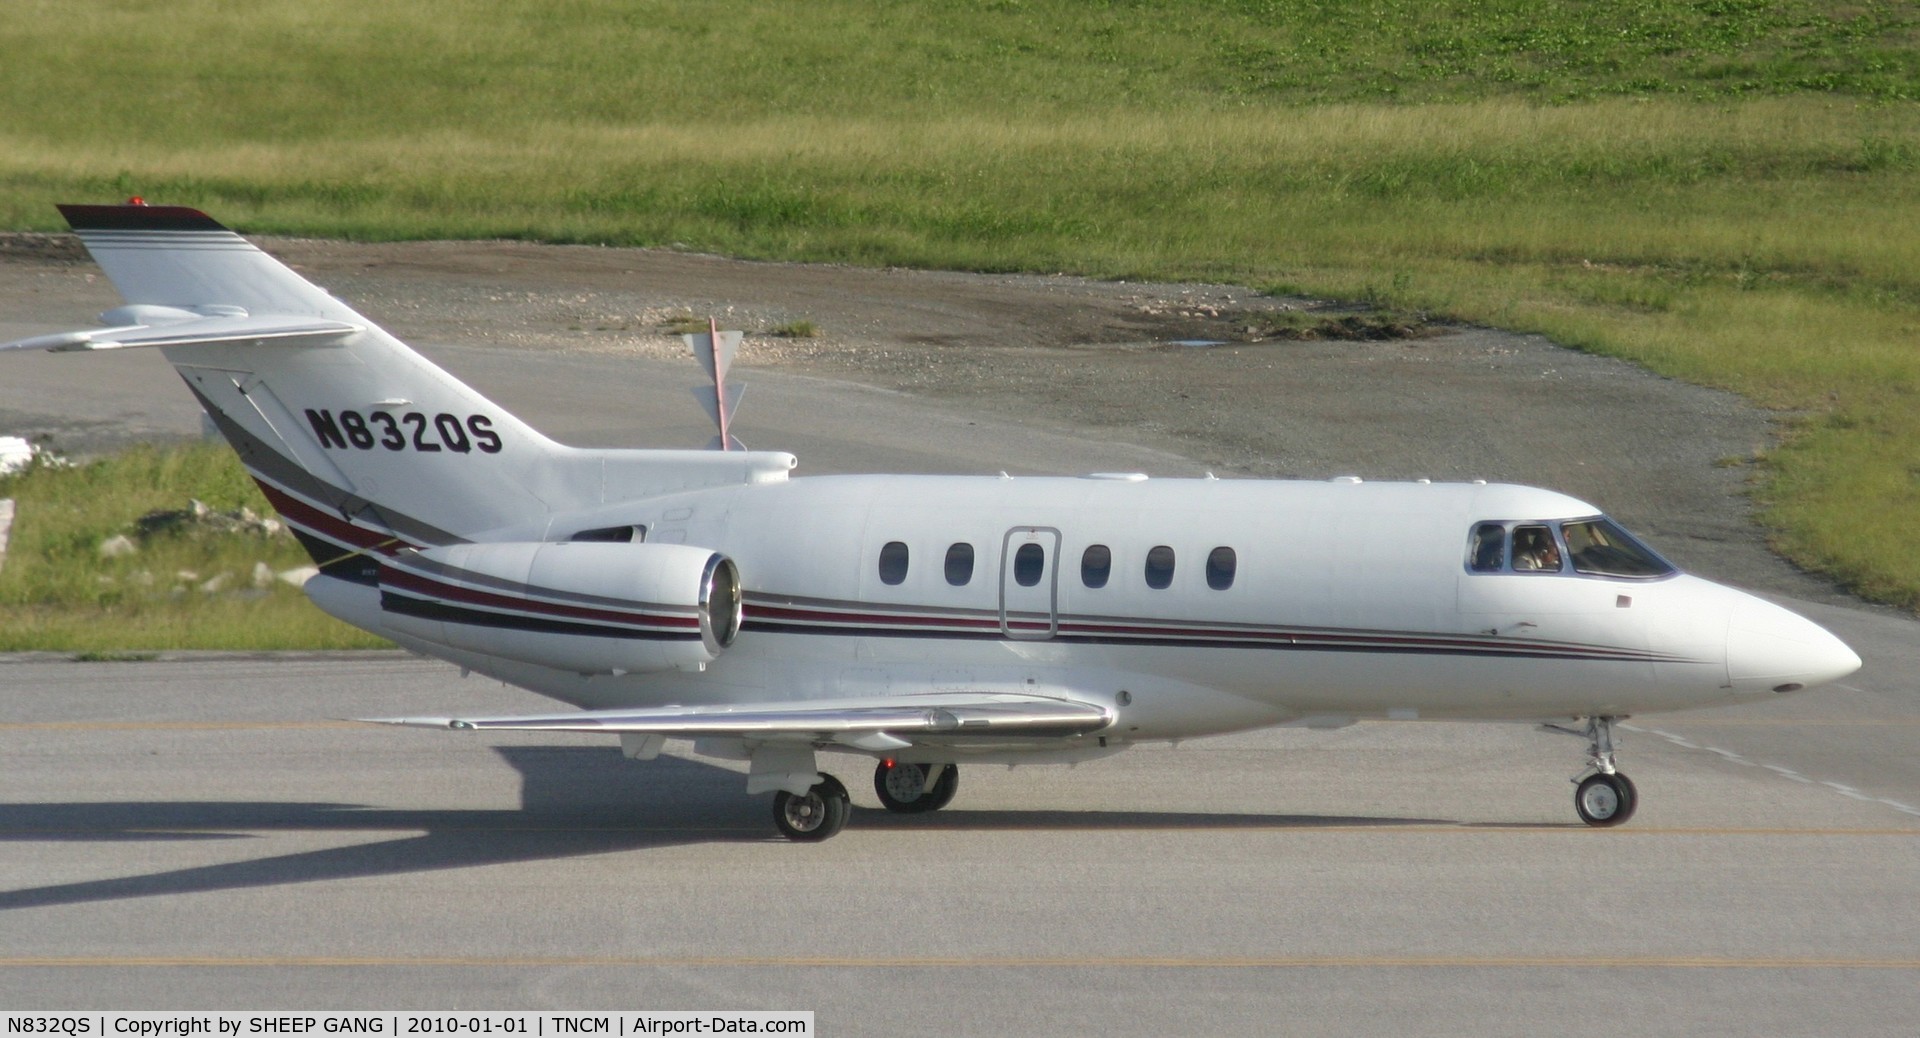 N832QS, 2004 Raytheon Hawker 800XP C/N 258683, N832QS taxing to alpha for take off